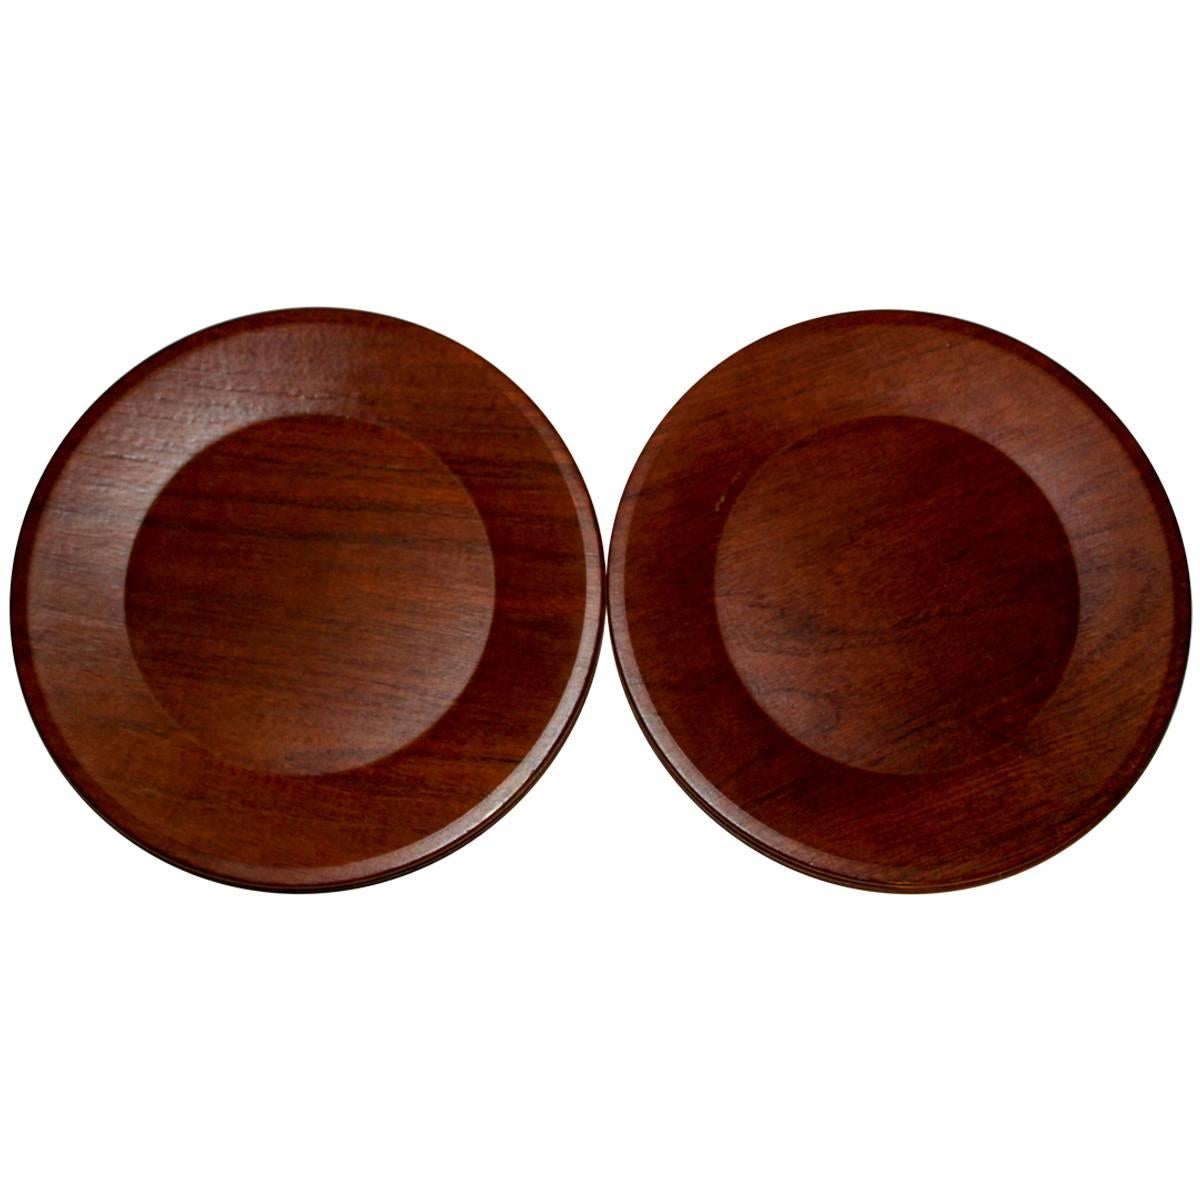 Set of 13 Swedish Teak Dining Plates by Silva from 1976